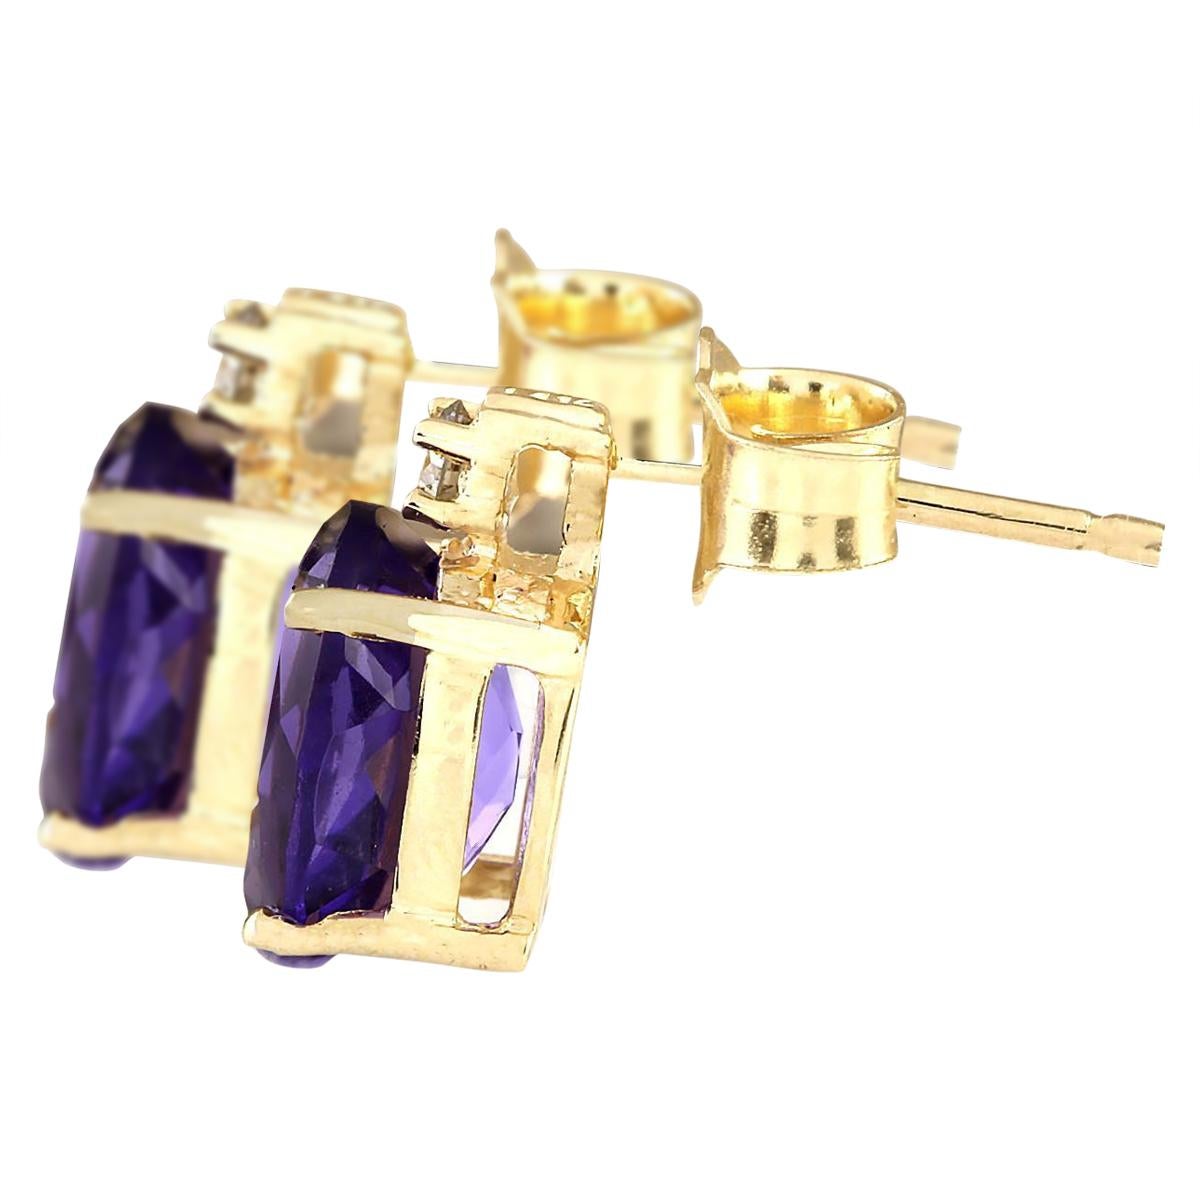 Presenting our exquisite 2.55 Carat Amethyst Earrings, crafted in luxurious 14K Yellow Gold. These enchanting earrings feature two stunning amethyst gemstones, totaling 2.50 carats, each measuring 8.00x6.00 millimeters, exuding a captivating purple